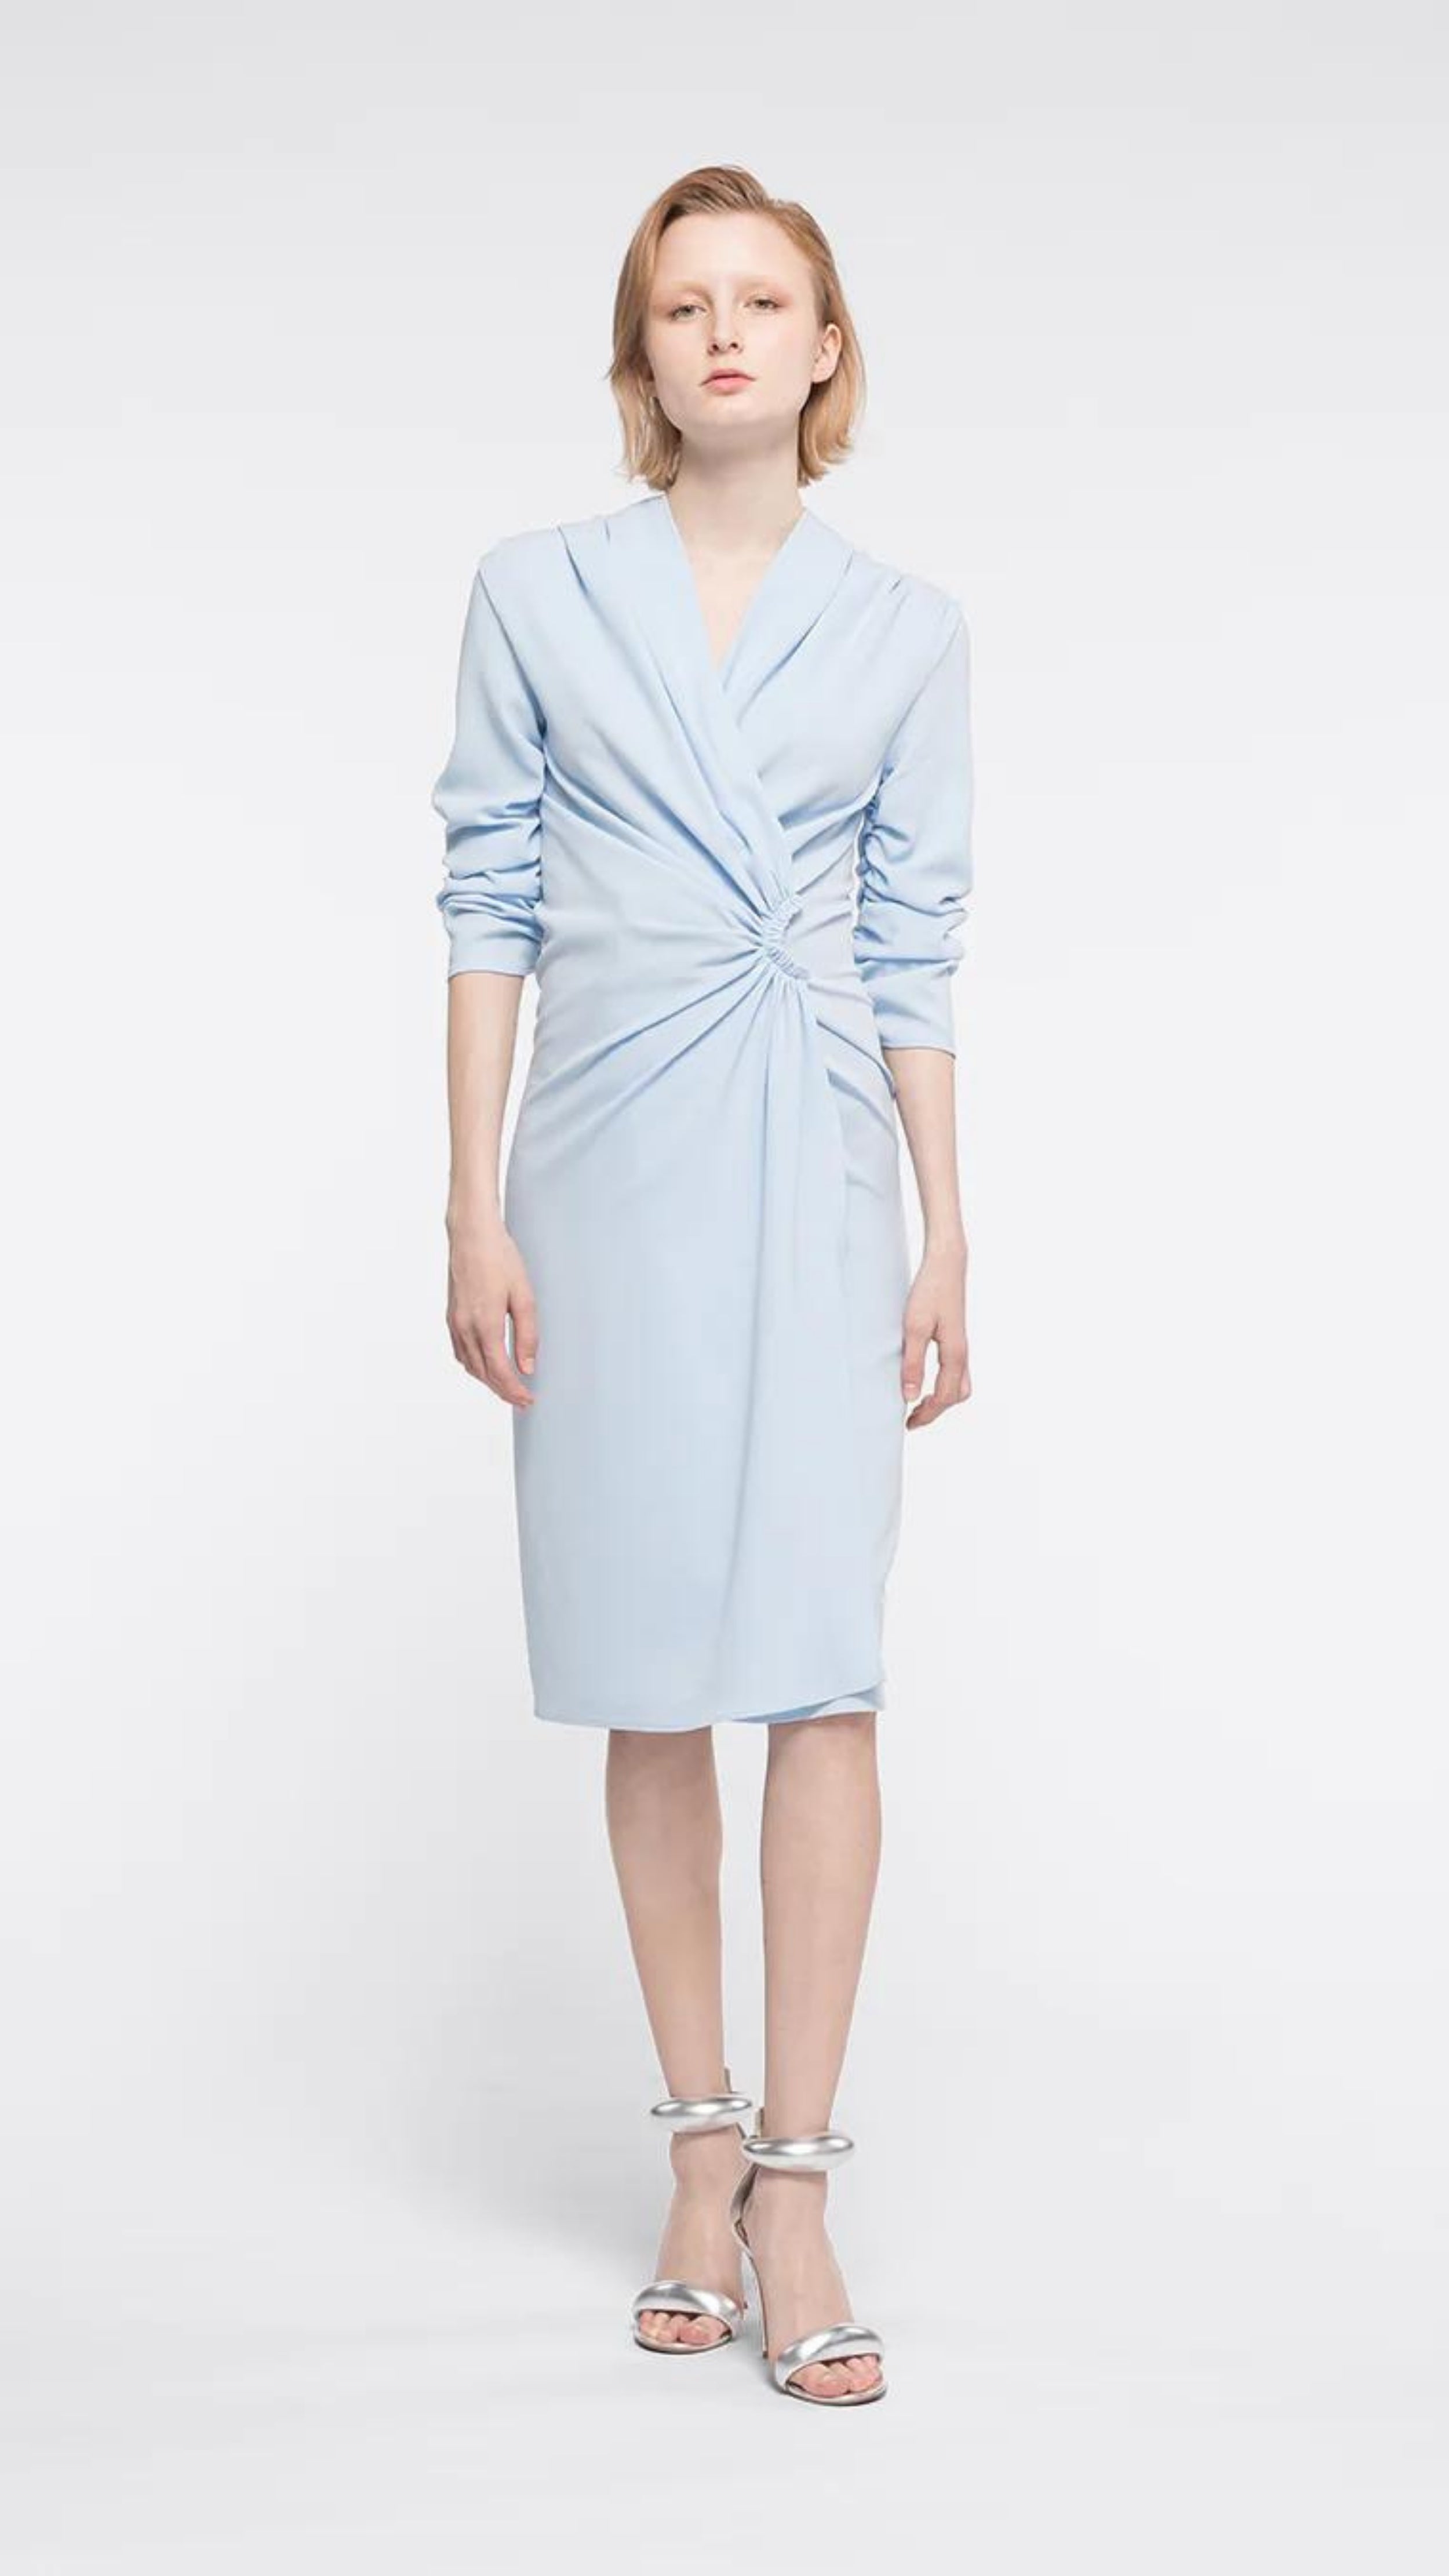 AZ Factory Lutz Huelle, Ella Dress. Crafted with a crepe texture in sky blue hue. V neck and draped, off center gathered front. Half length ruched sleeves  with a midi length skirt. Shown on model facing front